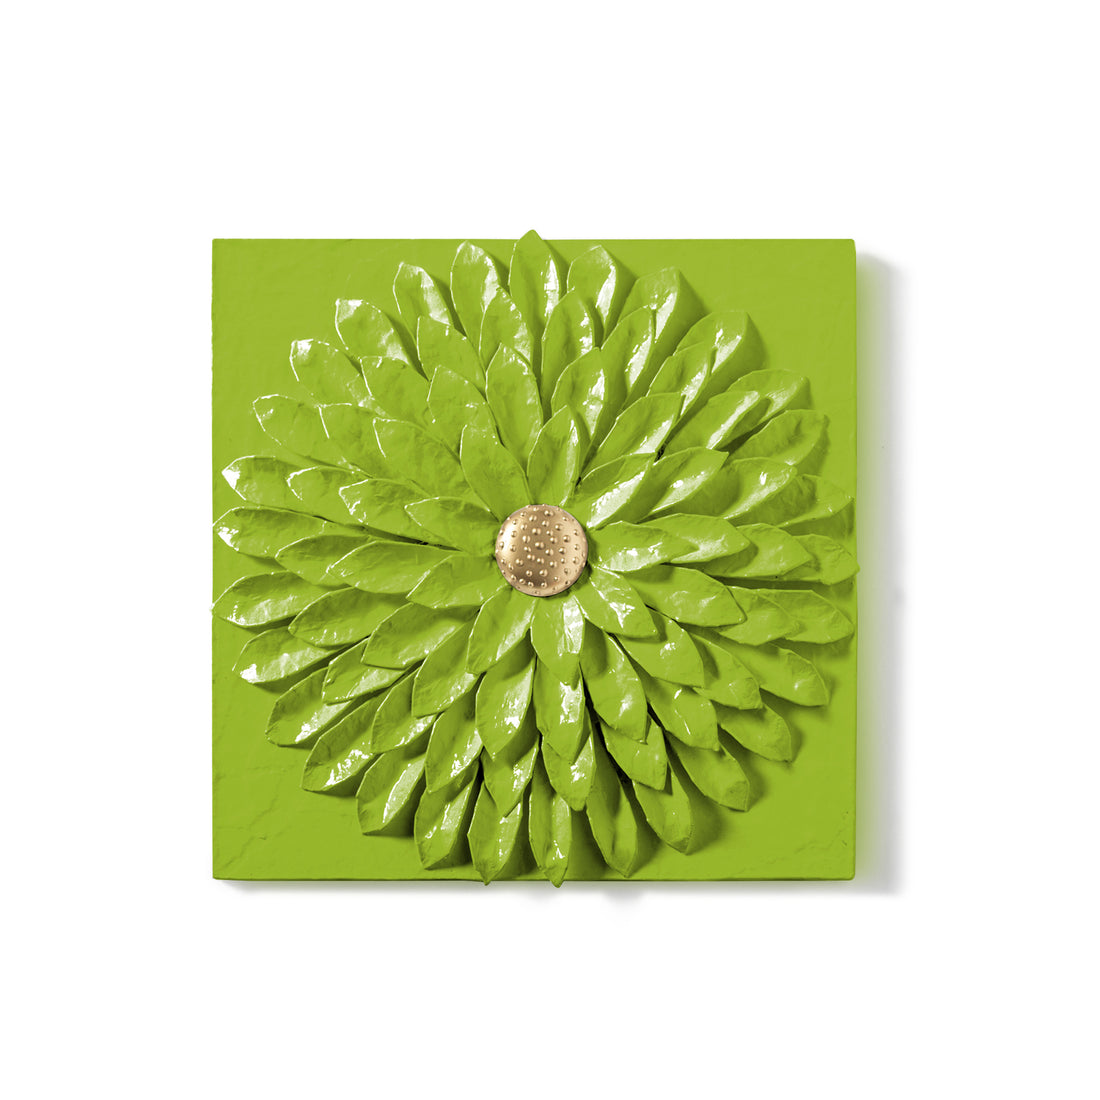 Dahlia Wall Tile by Stray Dog Designs In a Lush Green